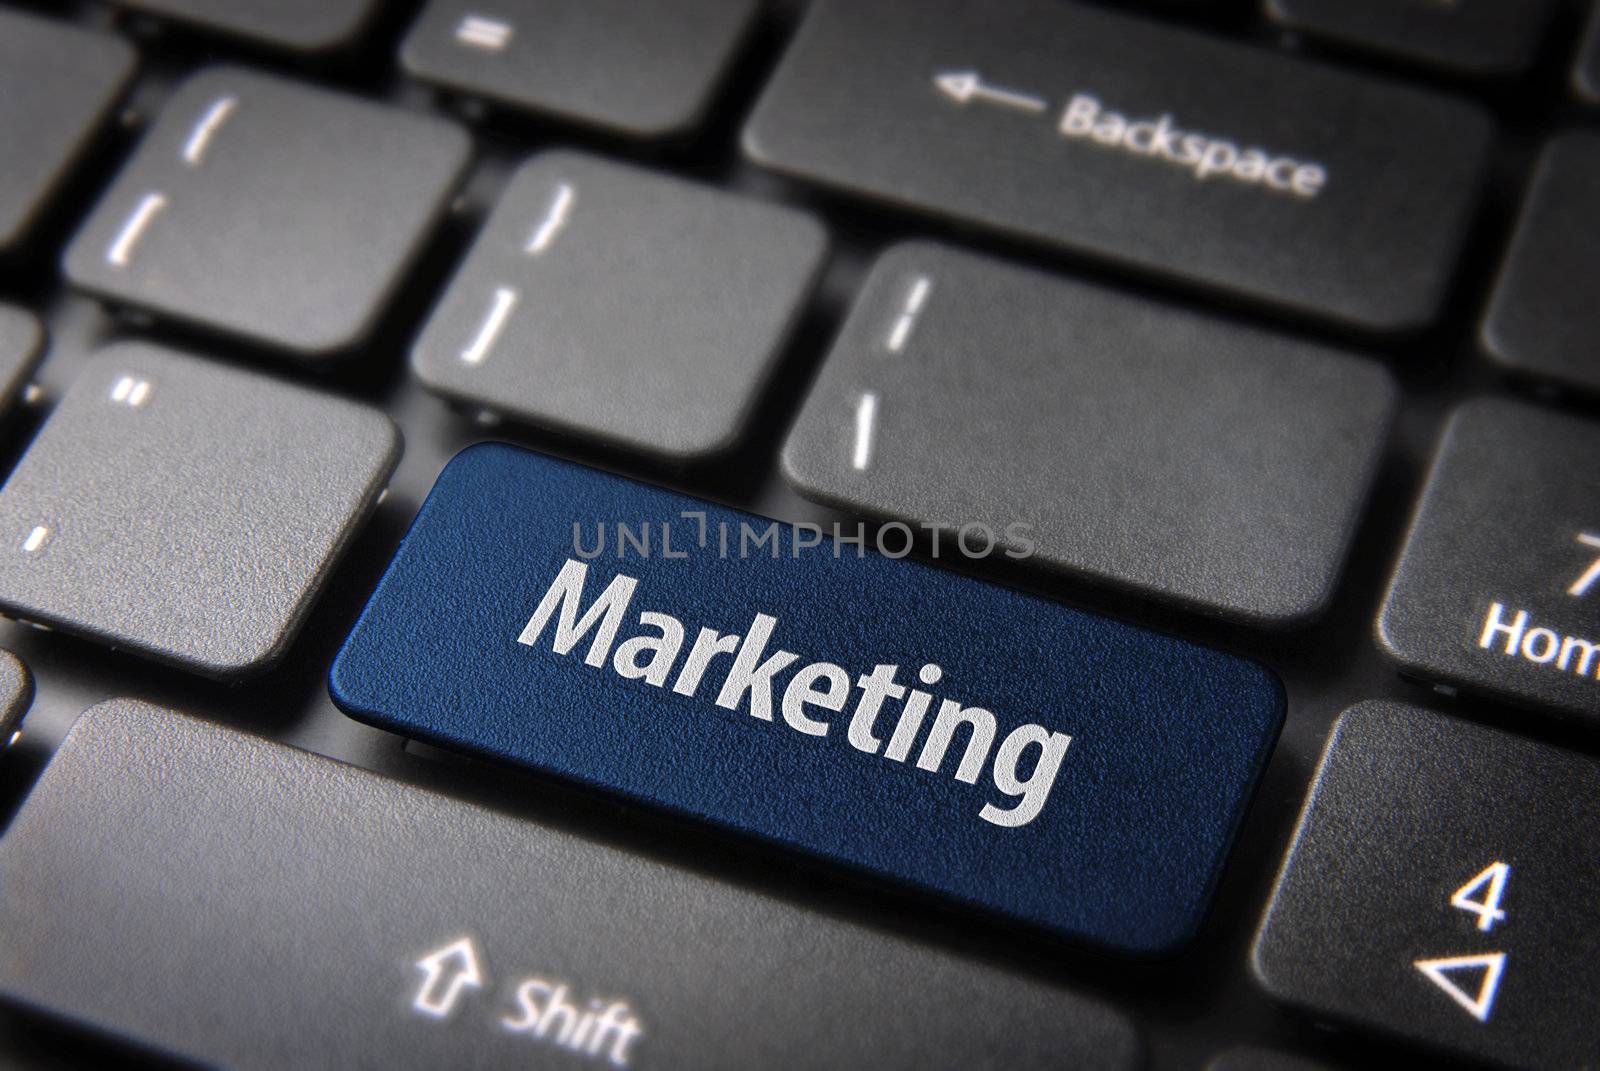 Blue key with marketing text on laptop keyboard. Included clipping path, so you can easily edit it.